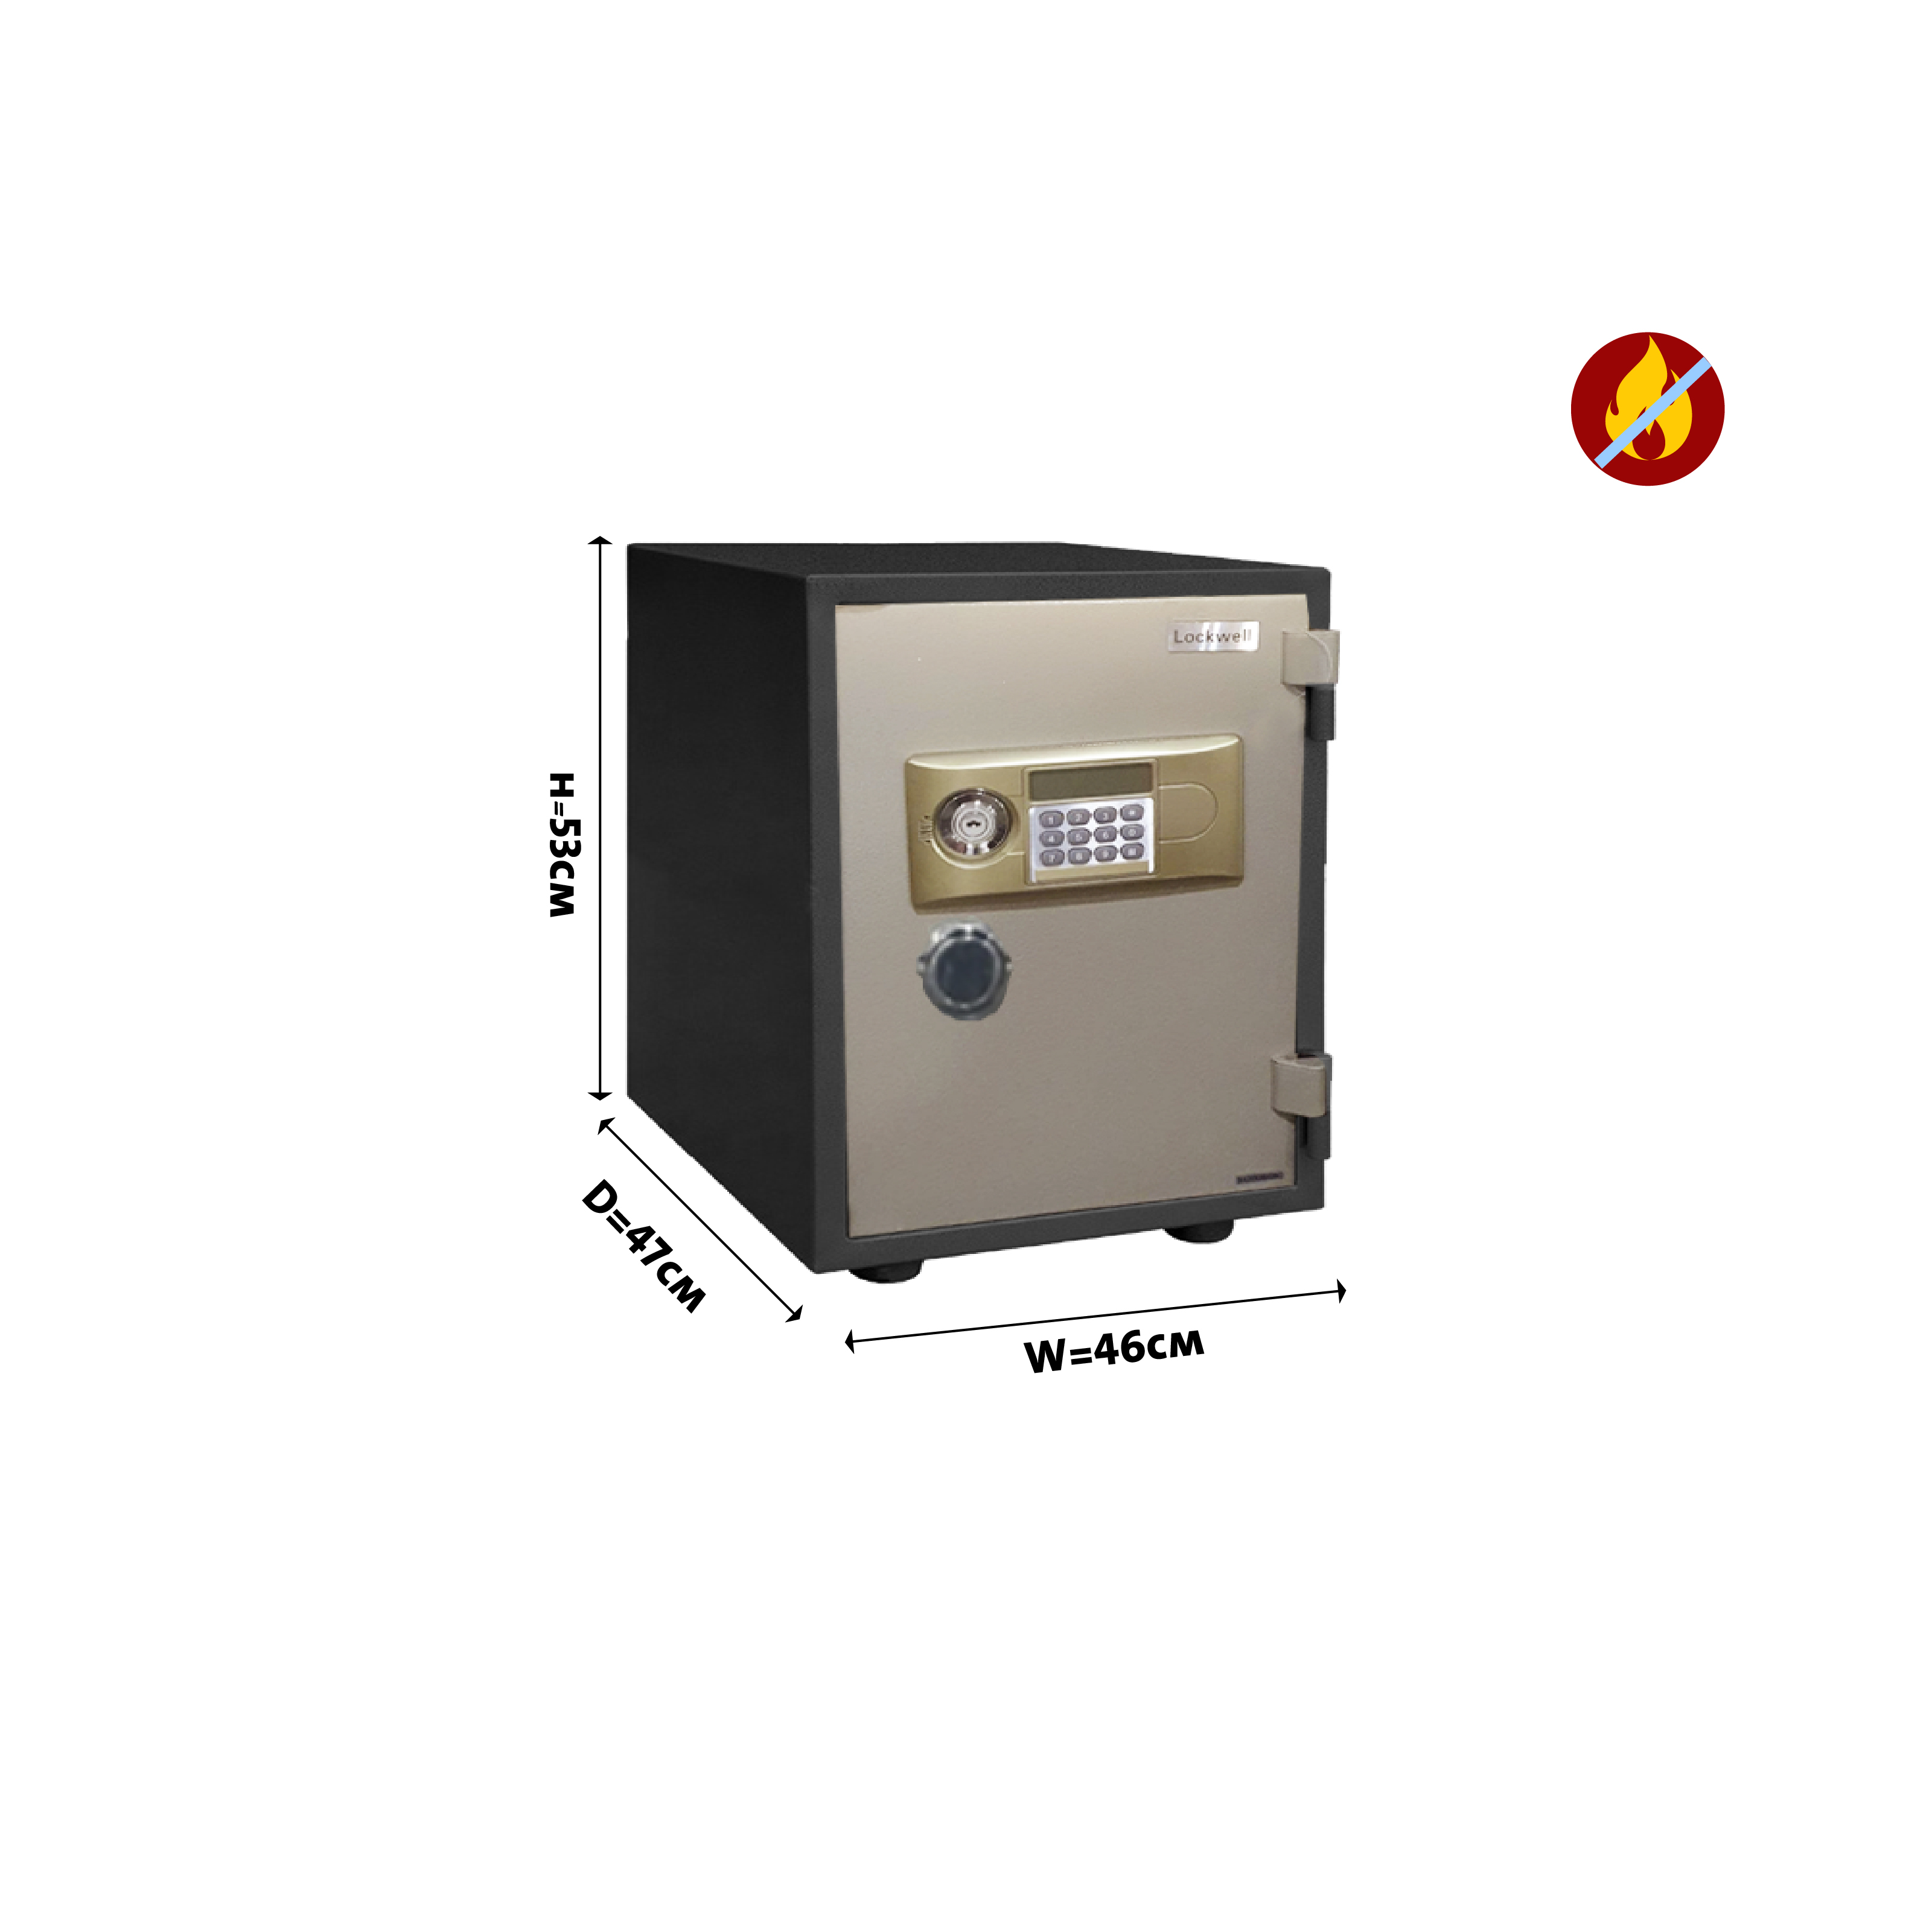 Lockwell ELectronic Fire Safe, YB530ALD